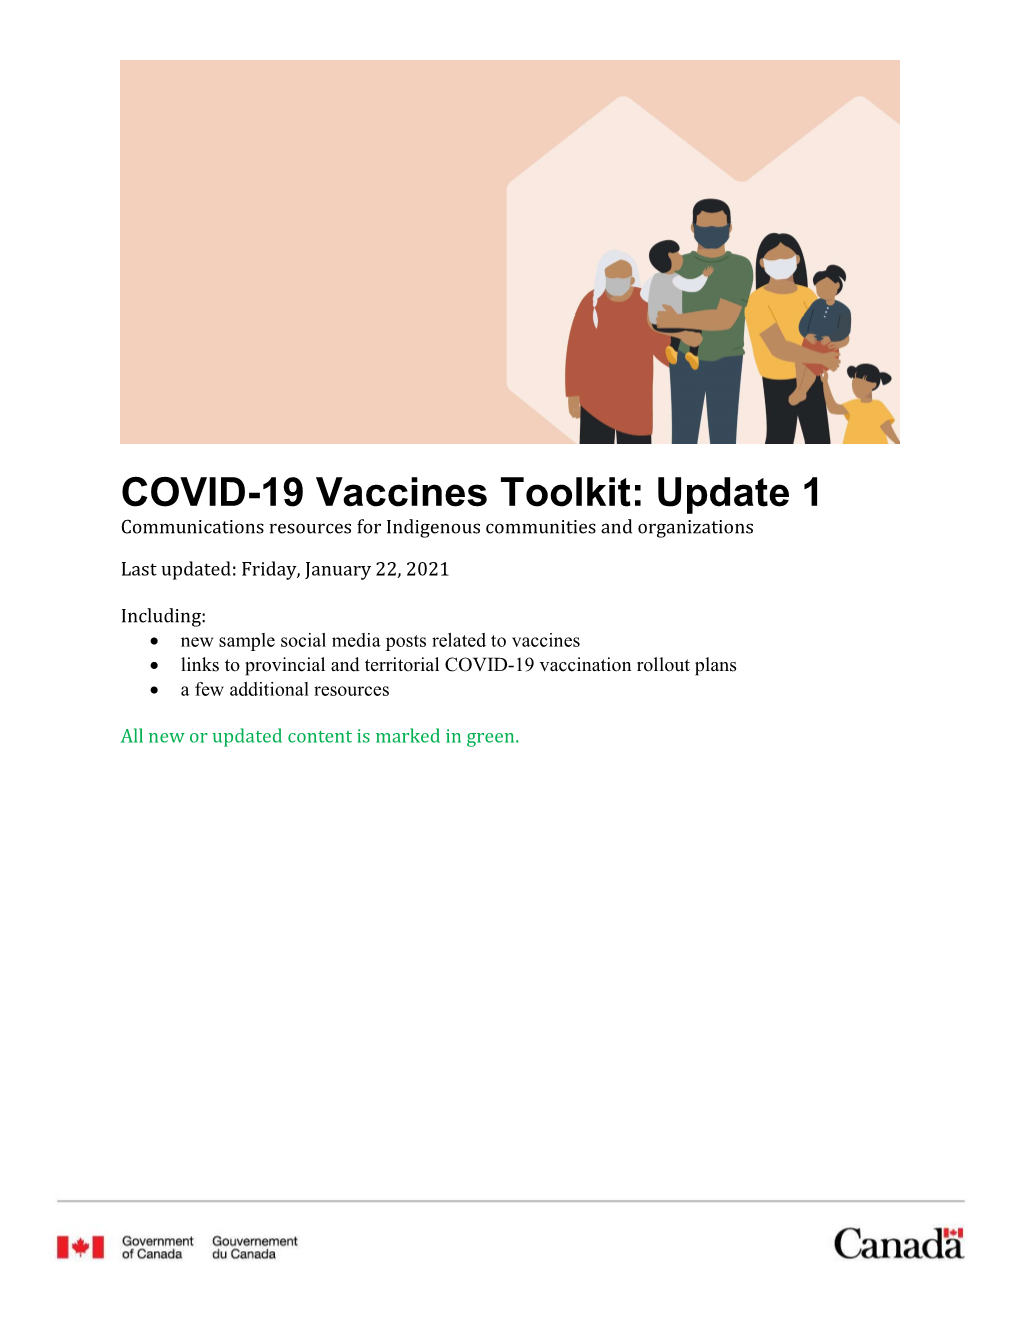 COVID-19 Vaccines Toolkit: Update 1 Communications Resources for Indigenous Communities and Organizations